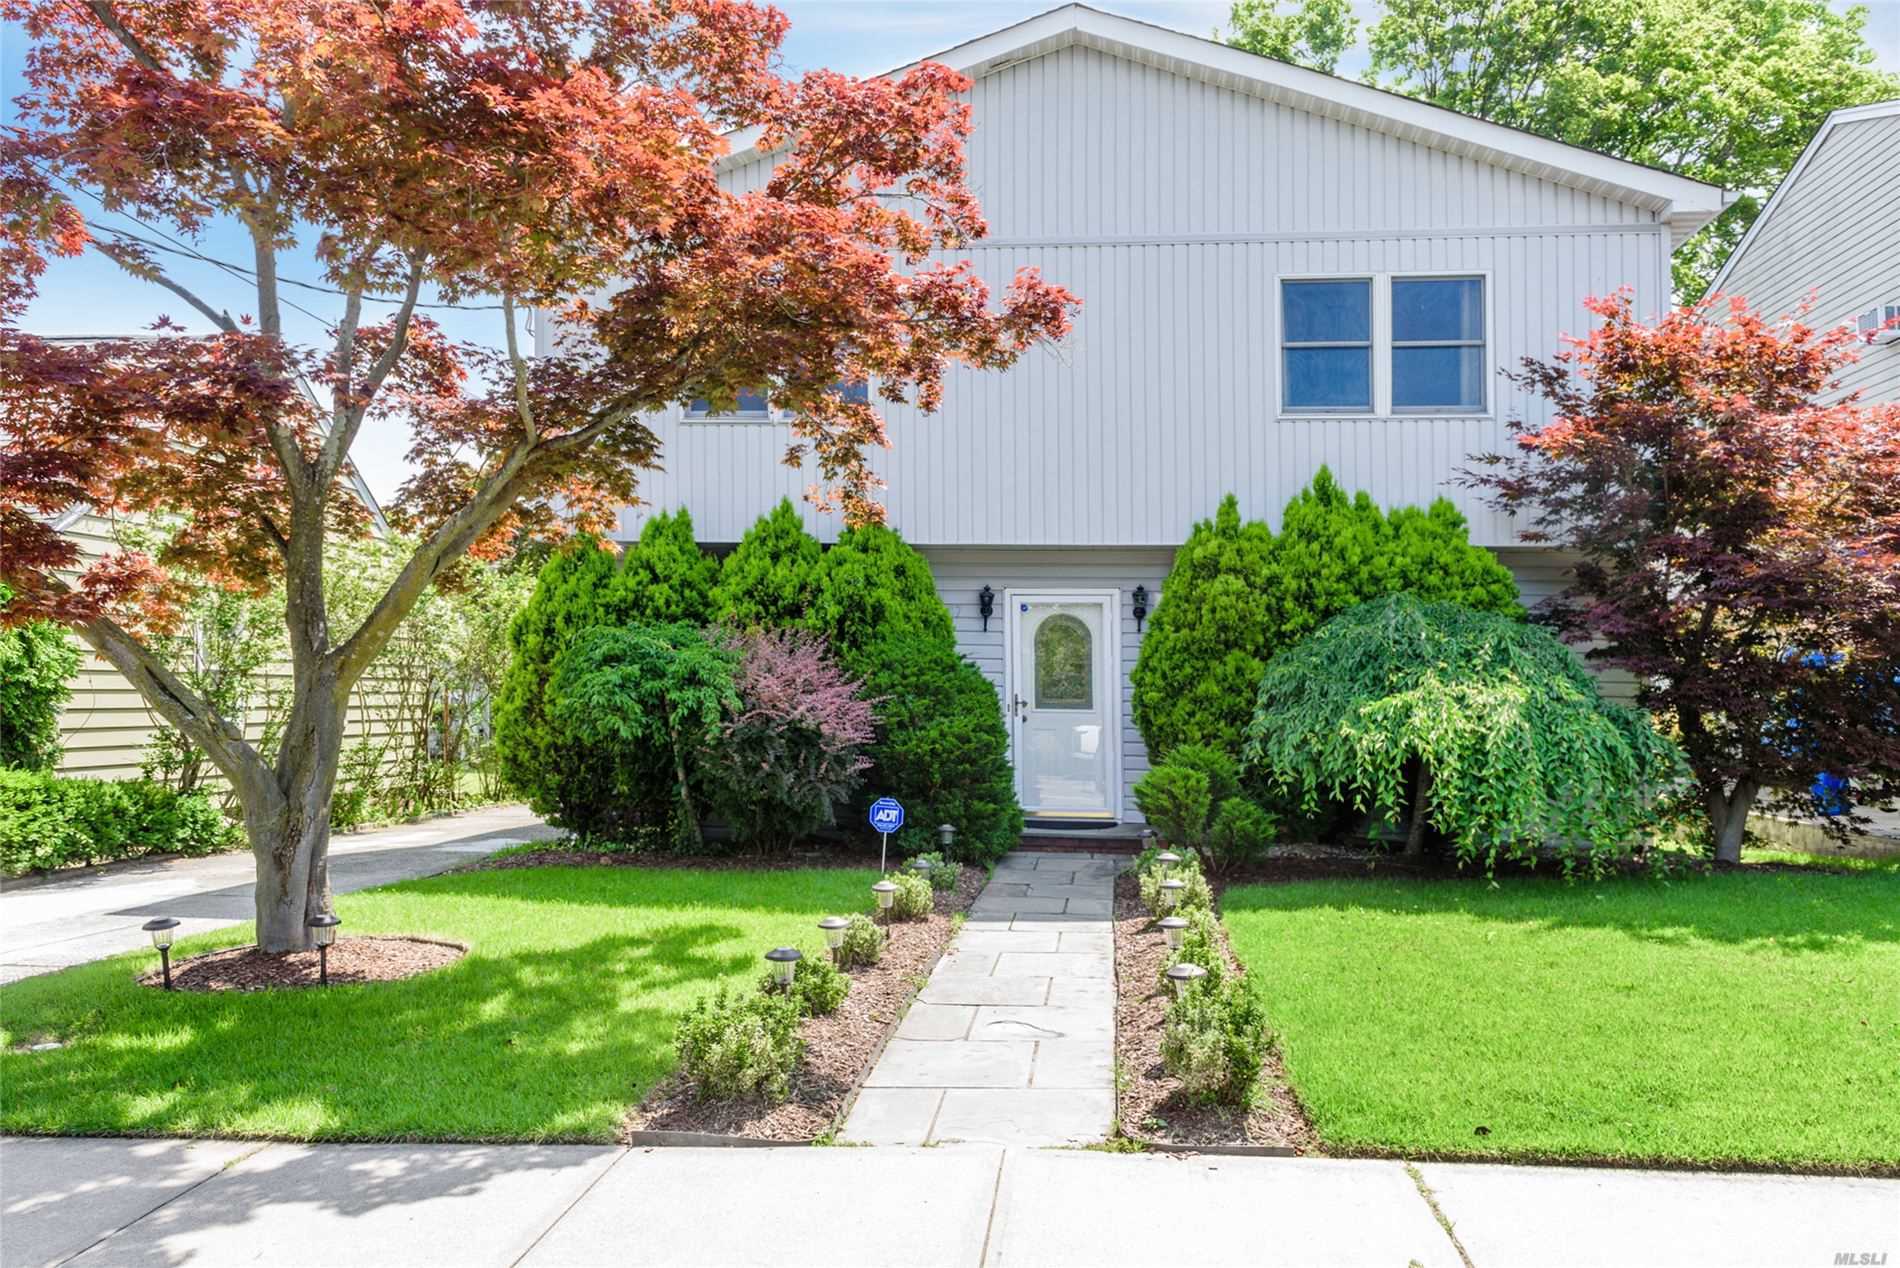 Renovated Pristine Colonial 3 Bed 2 Bath Home With Huge Eat It Kitchen, Formal Dining, Family Room, Den, And Full Finished Basement Perfect For Entertaining. This Home Boasts A Massive Master Suite And Beautiful Outdoor Area.